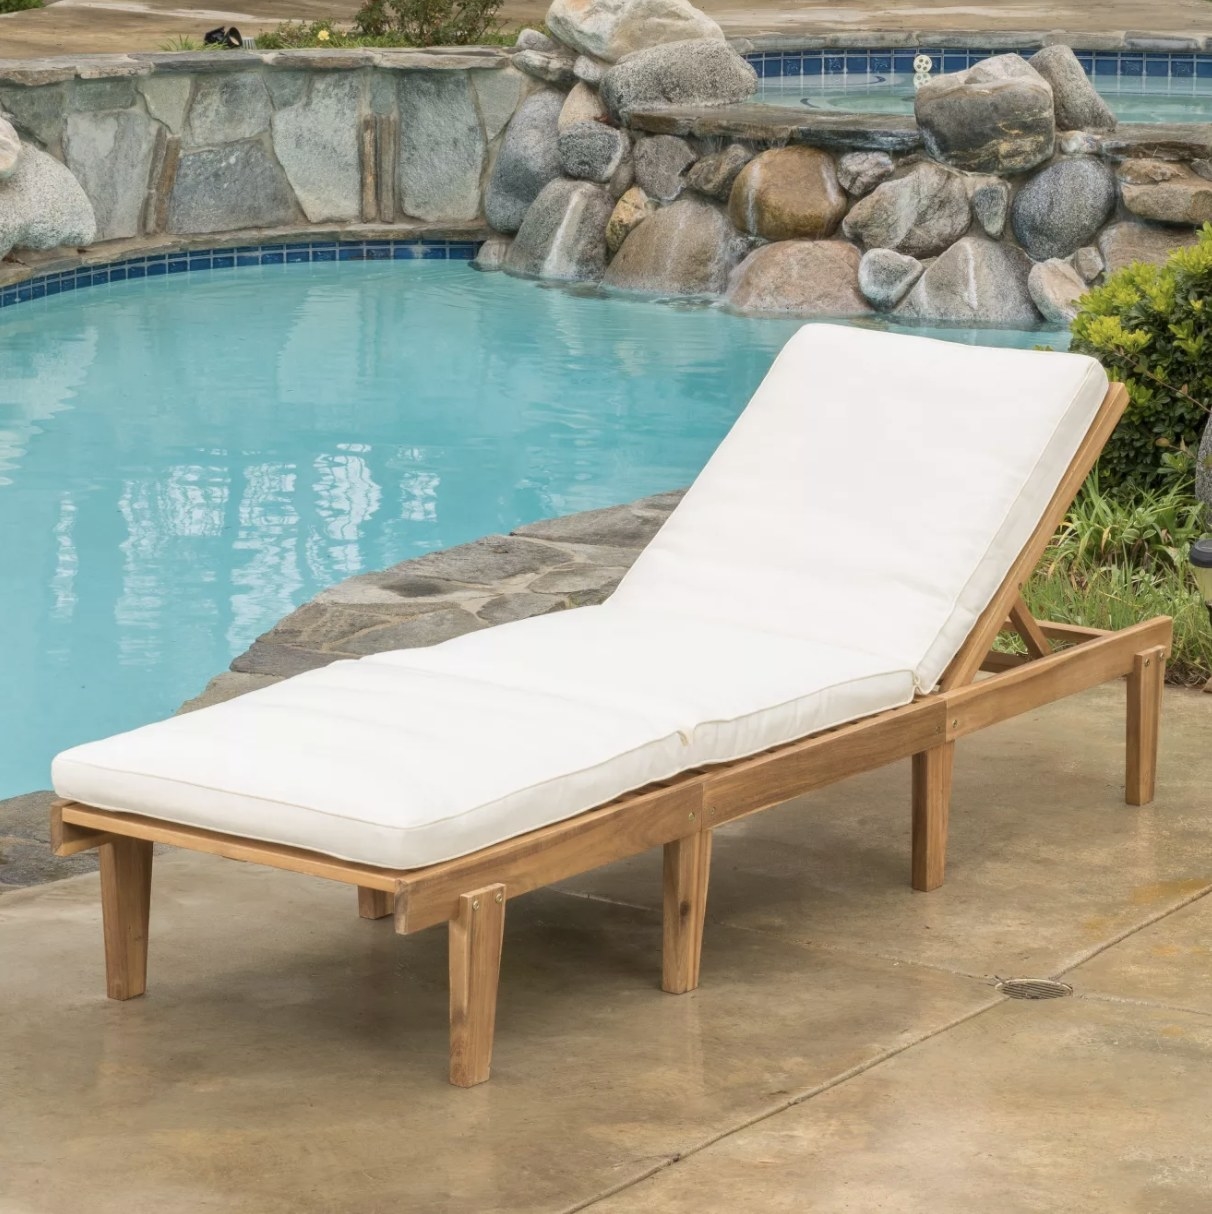 A wooden chaise lounge with a thick white cushion next to a pool